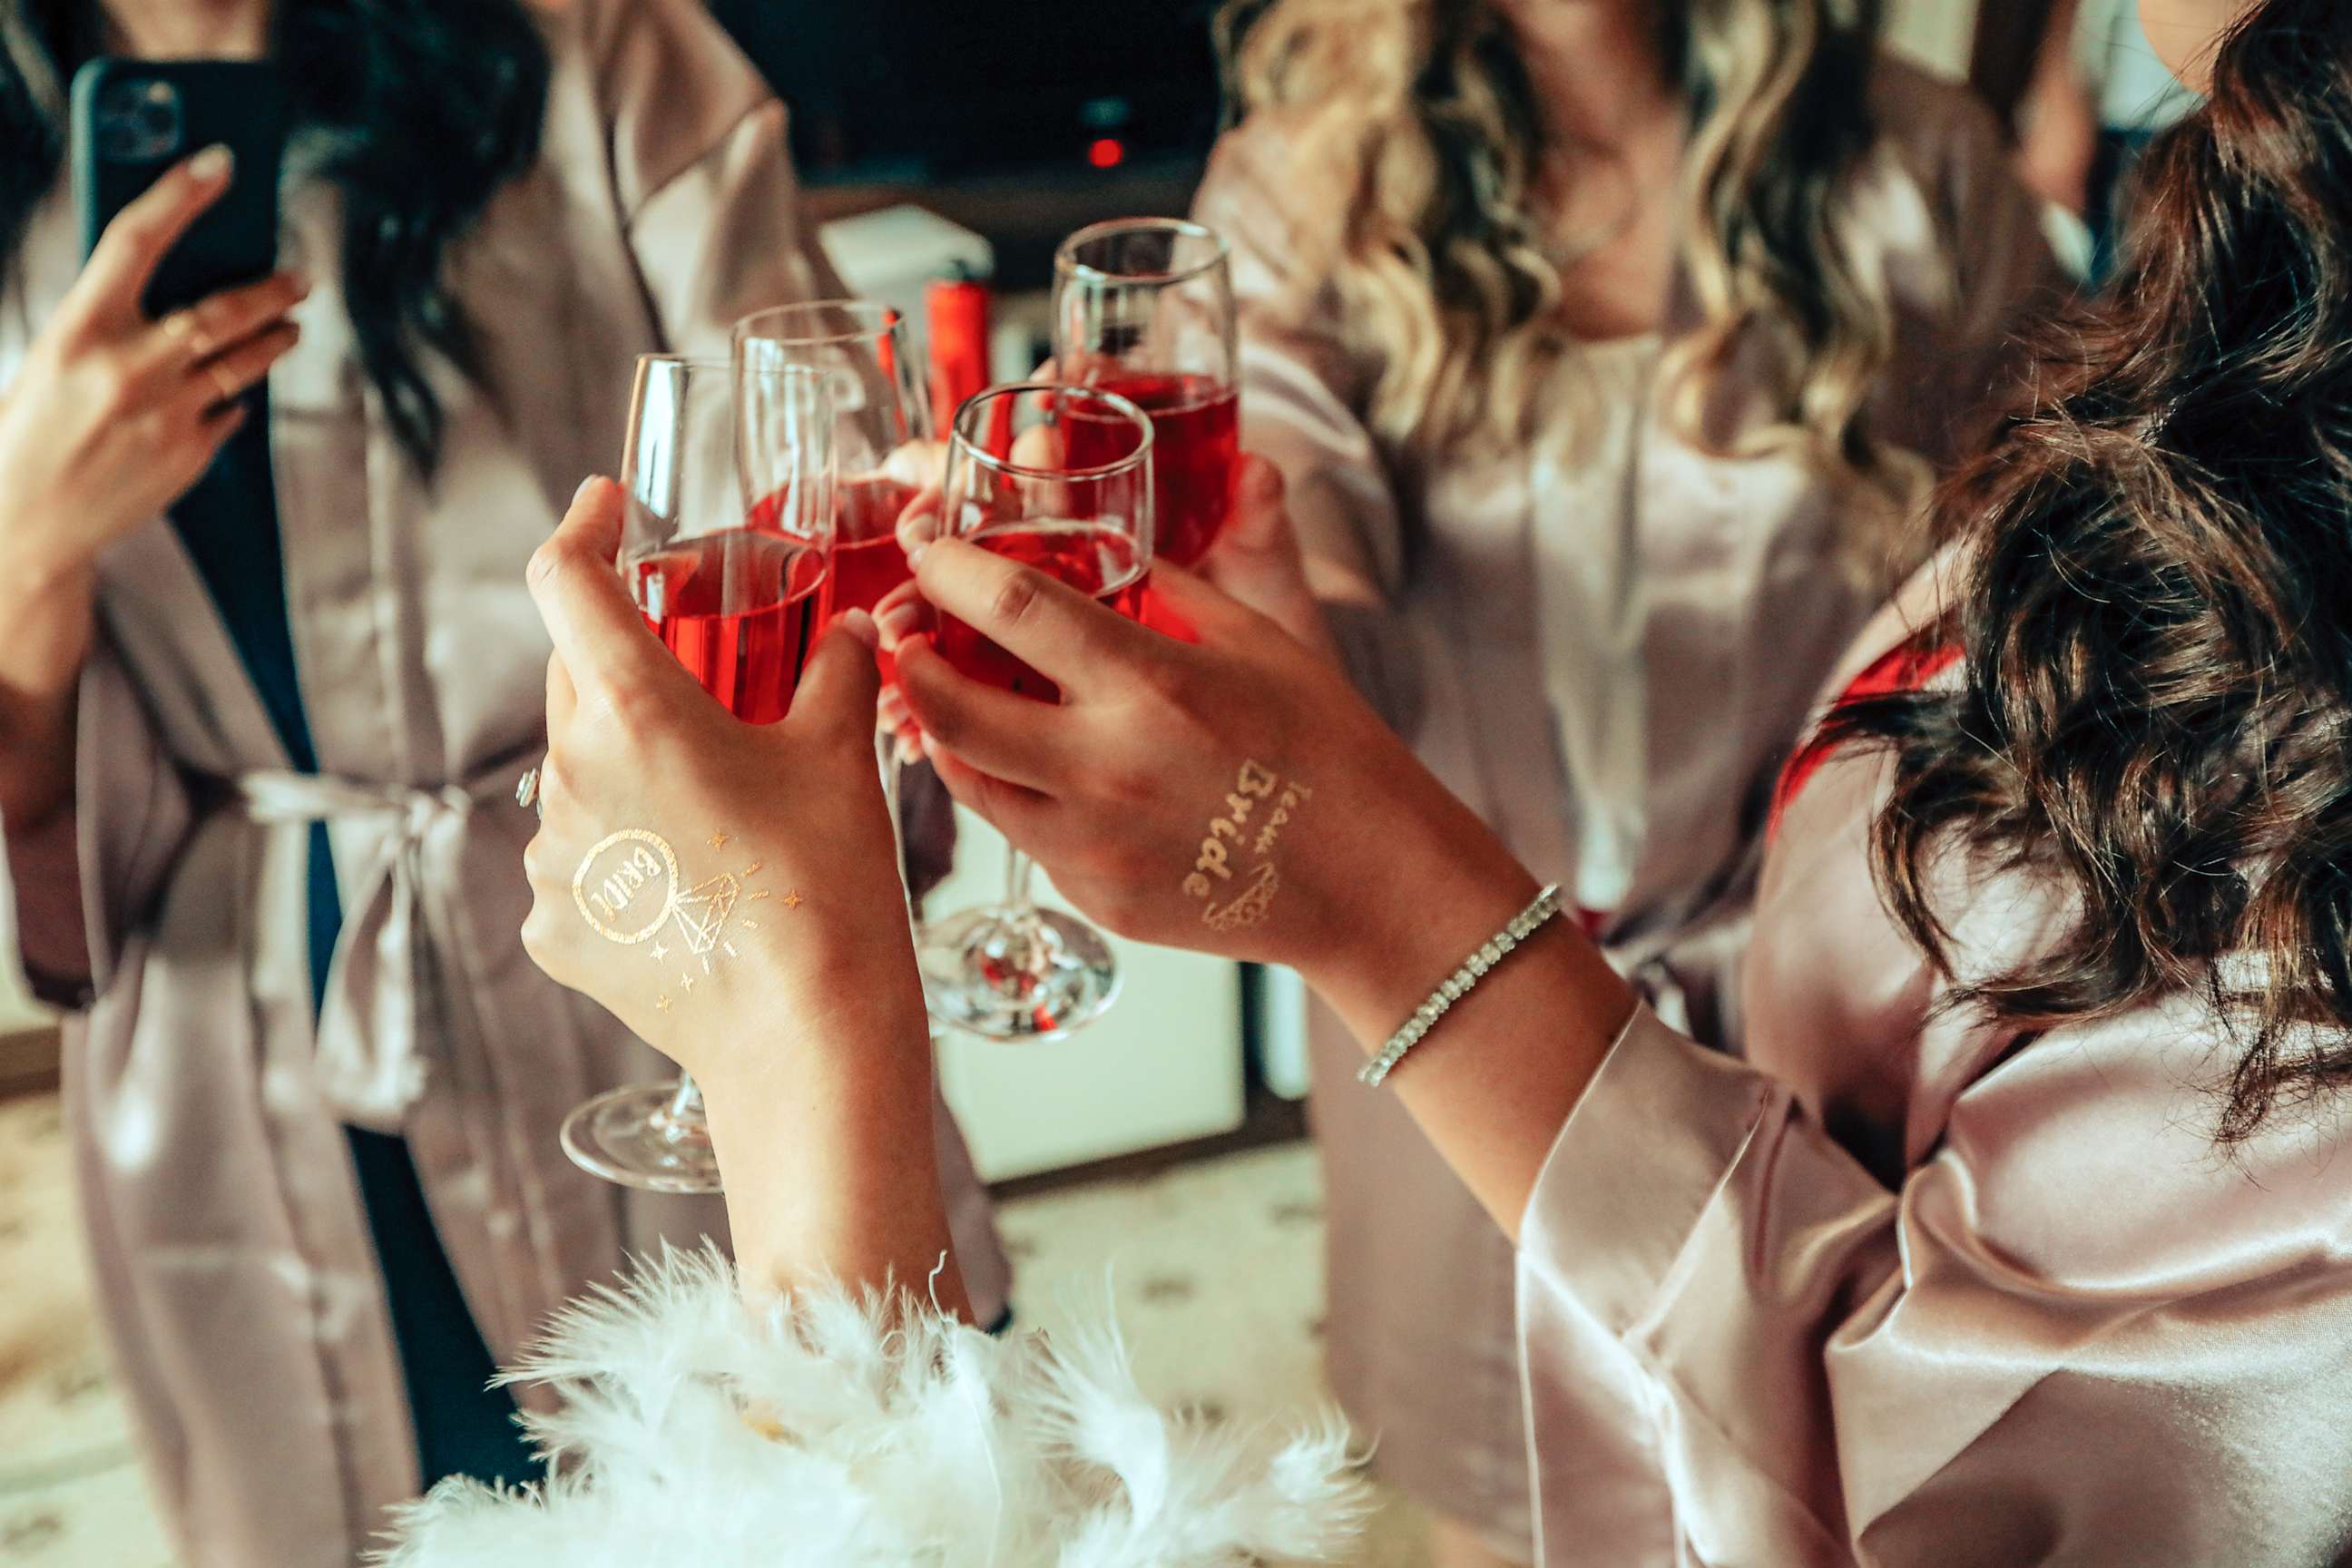 PHOTO: A bachelorette party is seen in this undated stock photo.